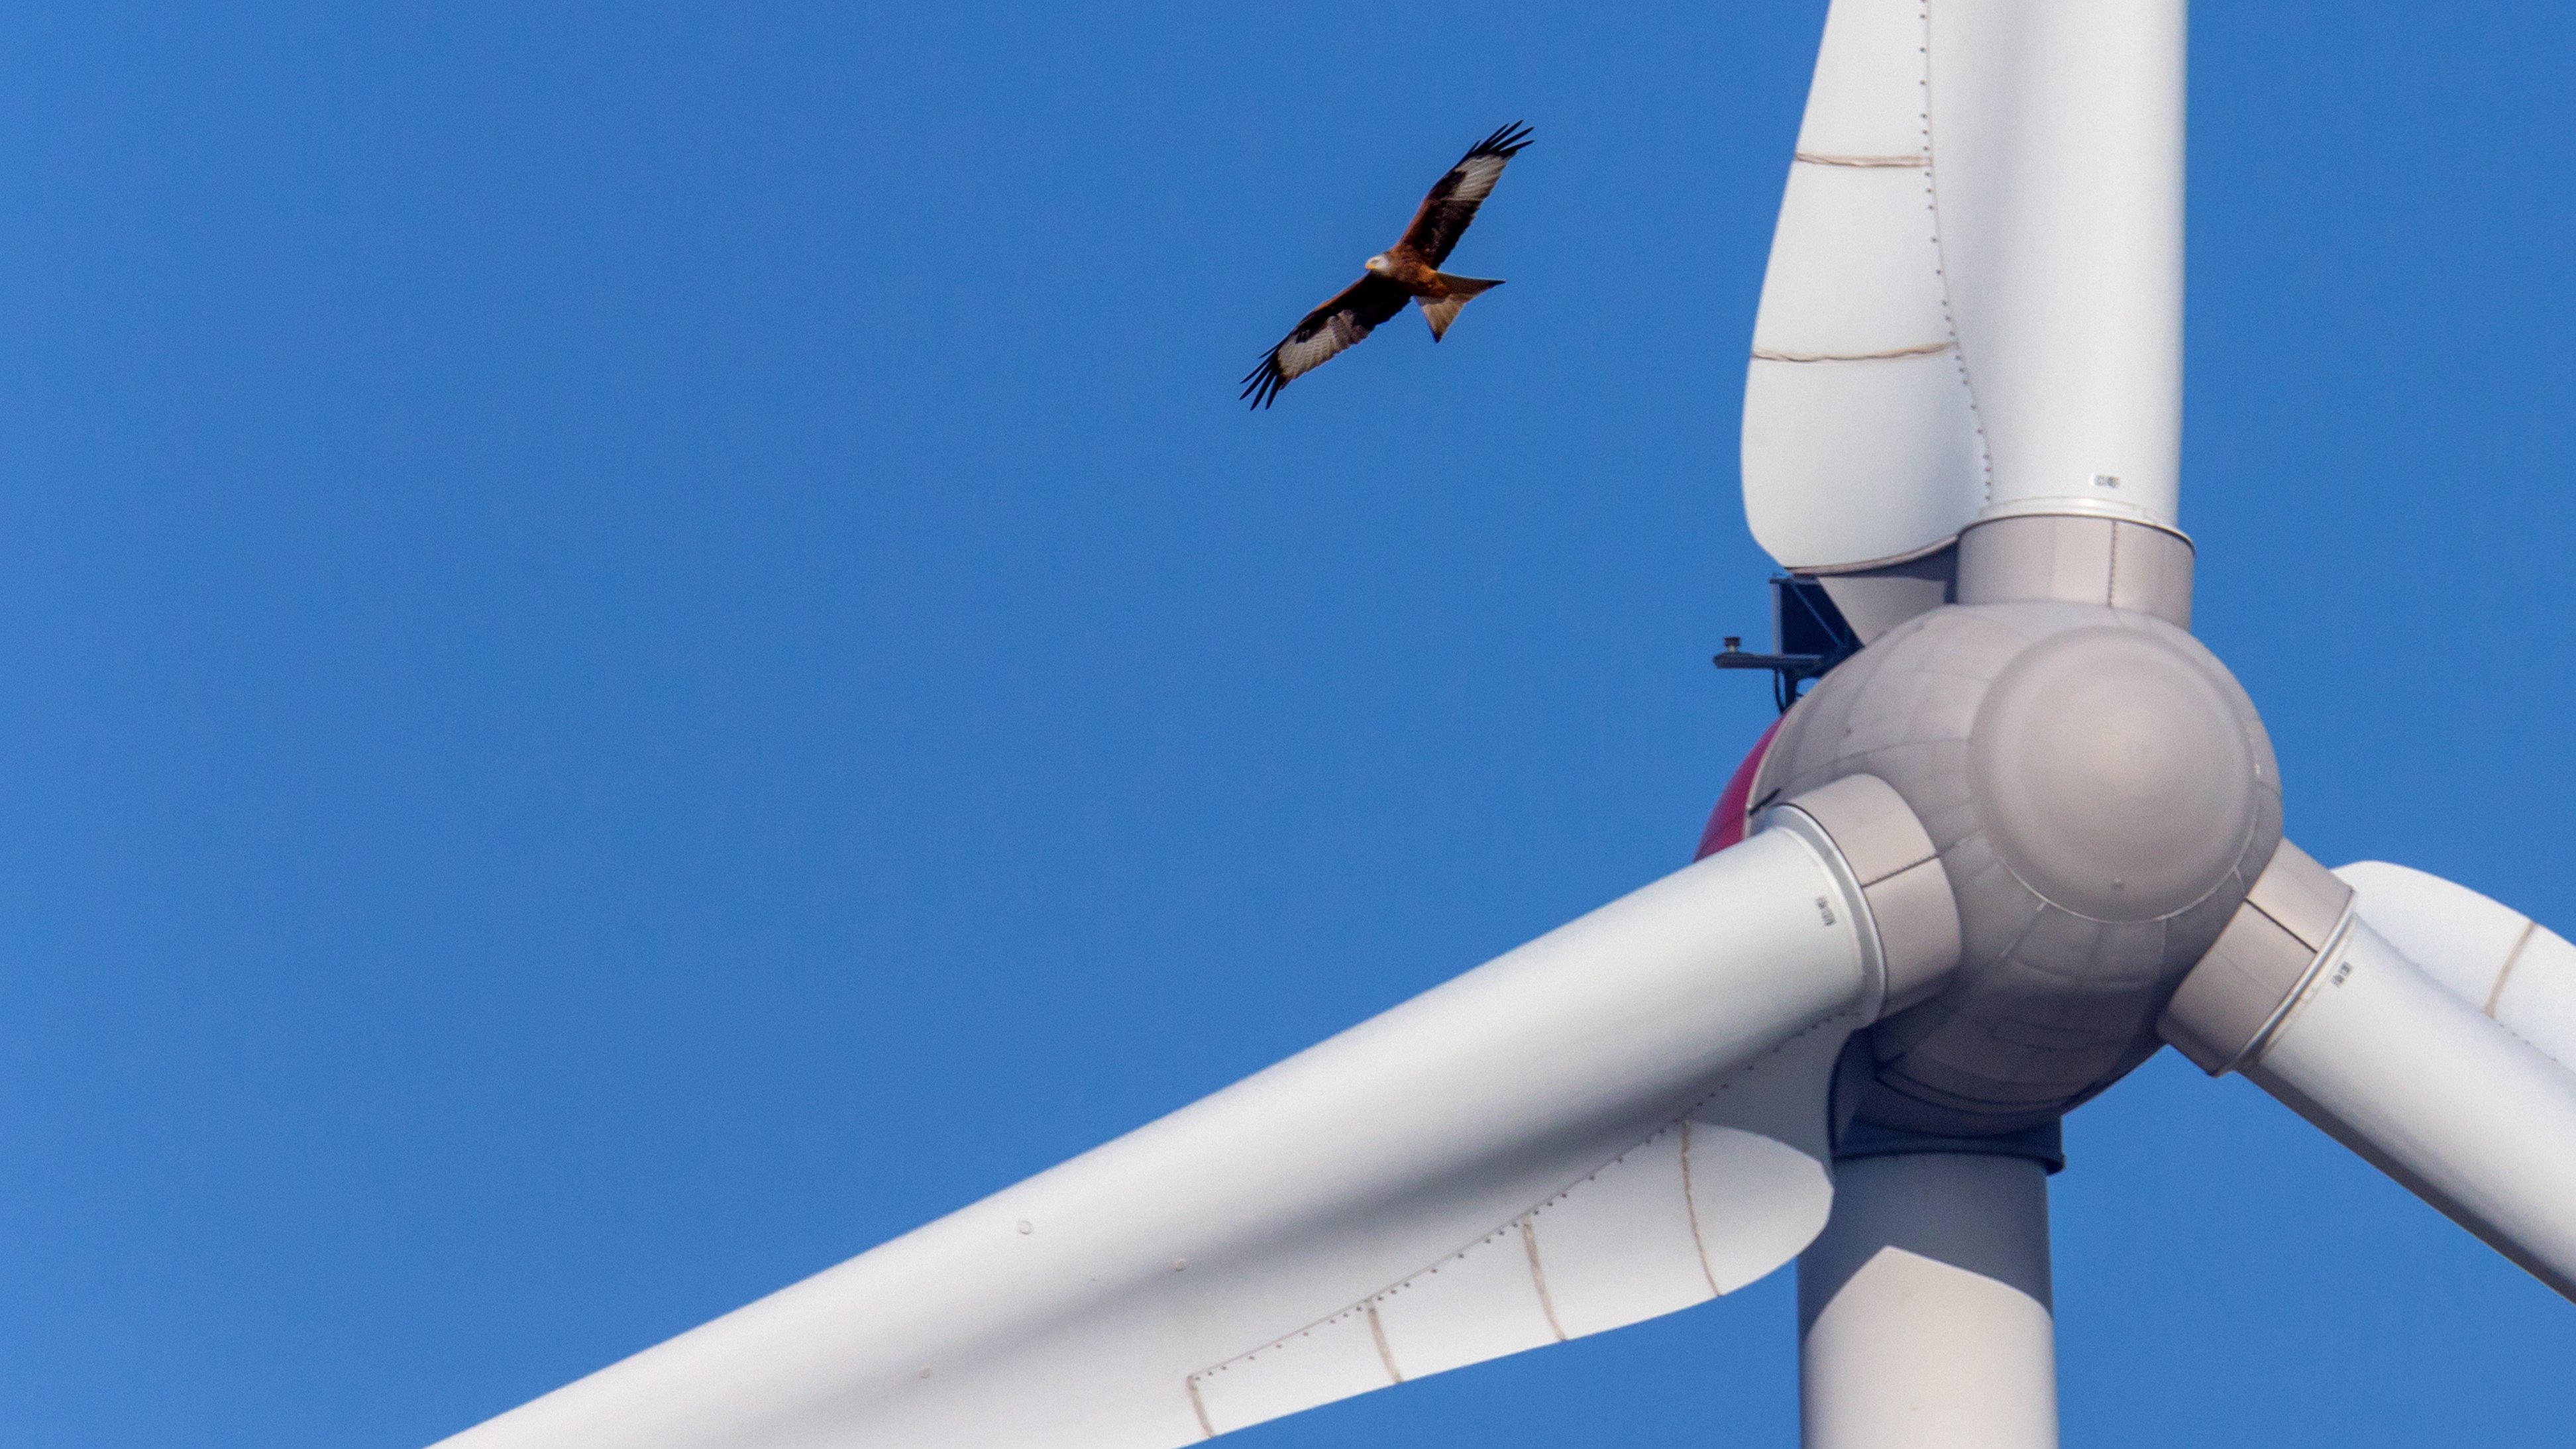 A red kite flies close to the rotor blades of a wind turbine.